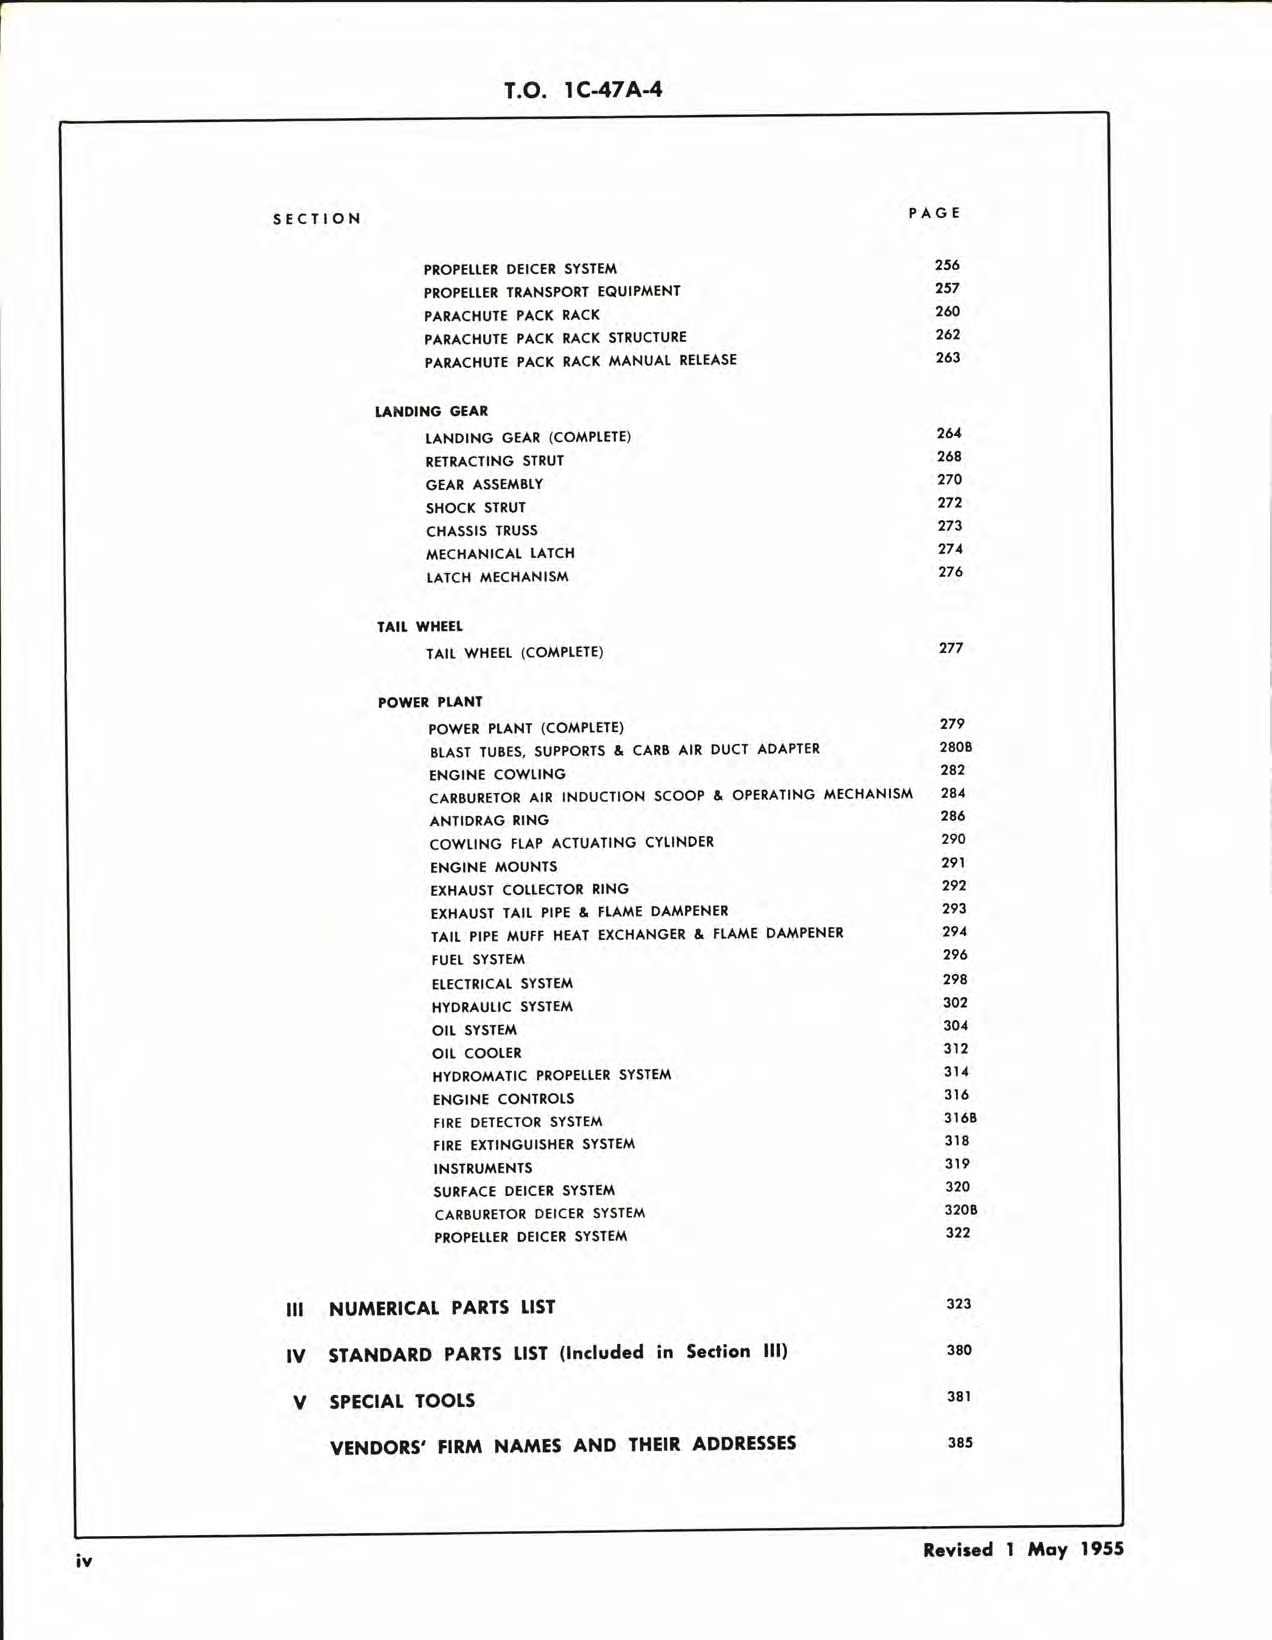 Sample page 8 from AirCorps Library document: Illustrated Parts Breakdown for C-47A and R4D-5 Aircraft